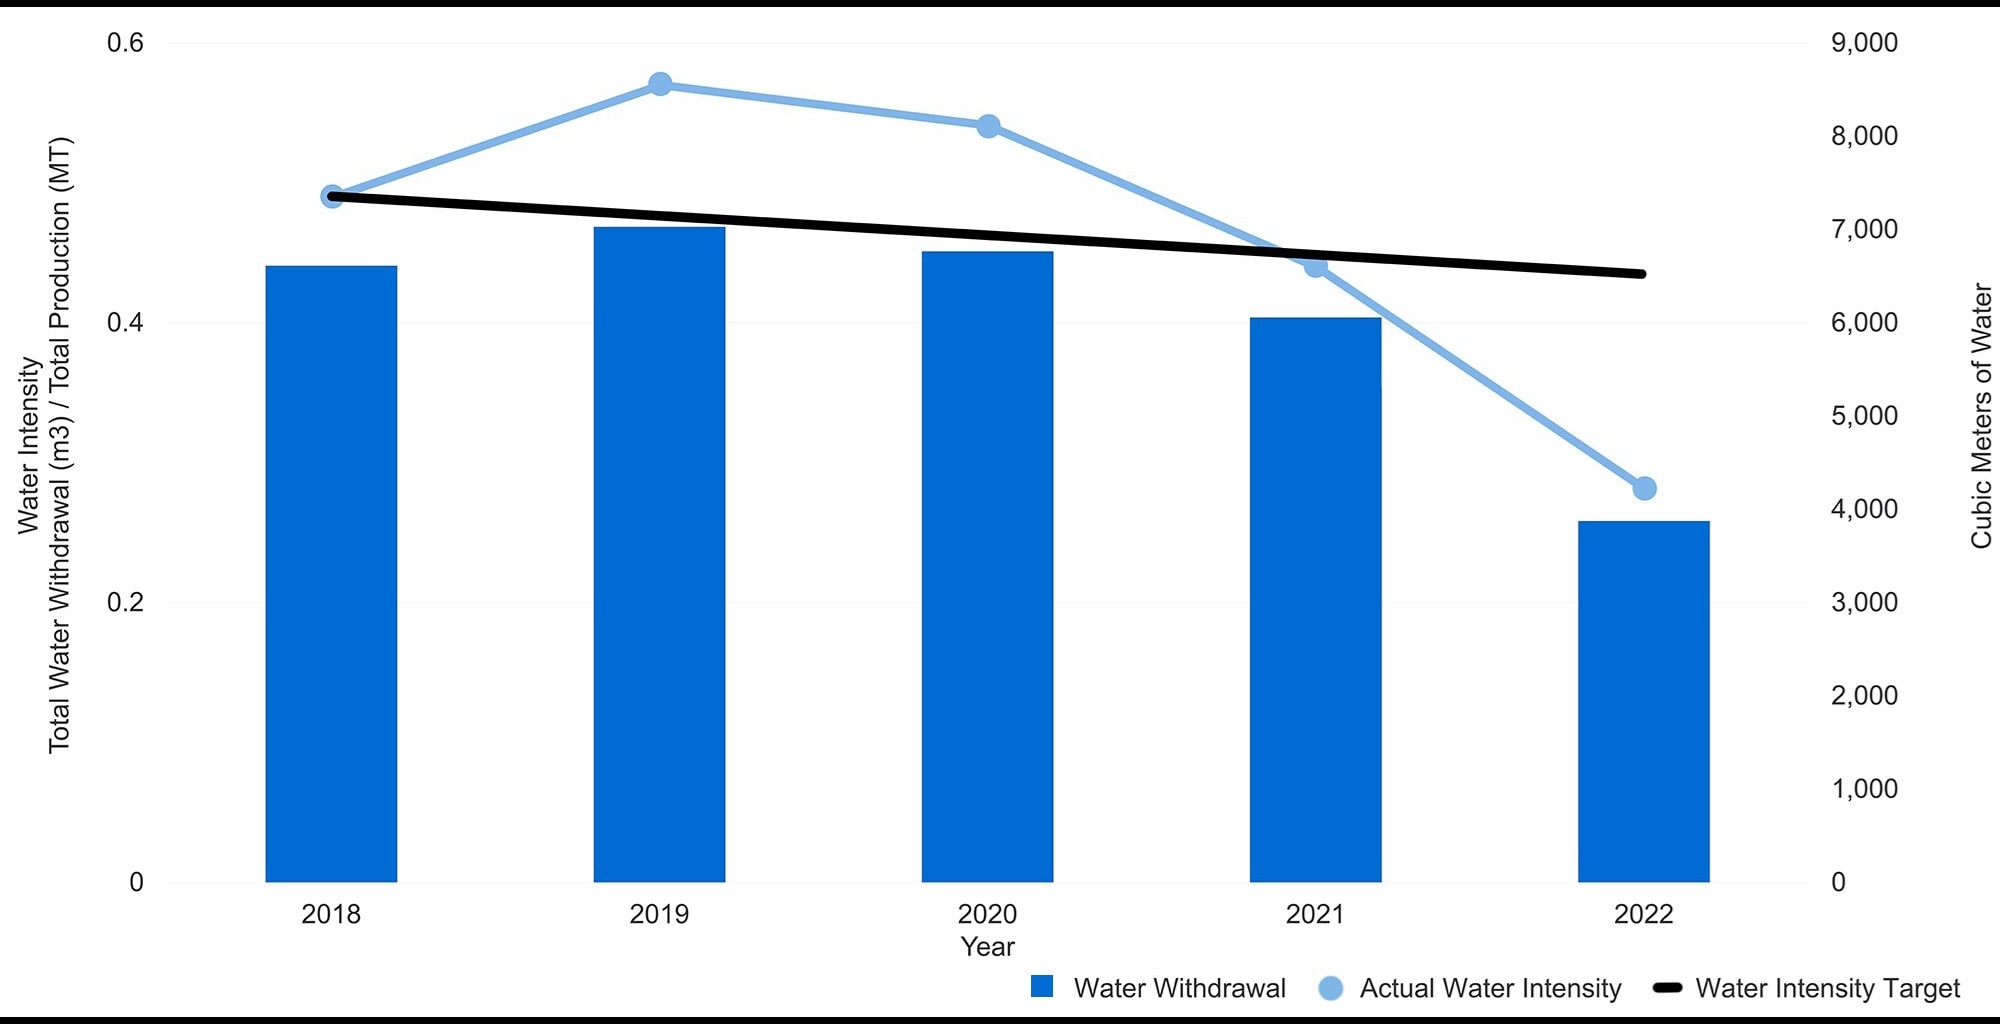 Chart of water intensity and water with drawl at the Monterrey plant from 2018-2022 with water intensity target: Water intensity Target (3% reduction year over year); Water Intensity Actuals (2018: 0.49; 2019: 0.57; 2020: 0.54; 2021: 0.44; 2022: 0.28); Water withdrawal cubic meters (2018: 6,610; 2019: 7,027; 2020: 6764; 2021: 6,055; 2022: 3,873)